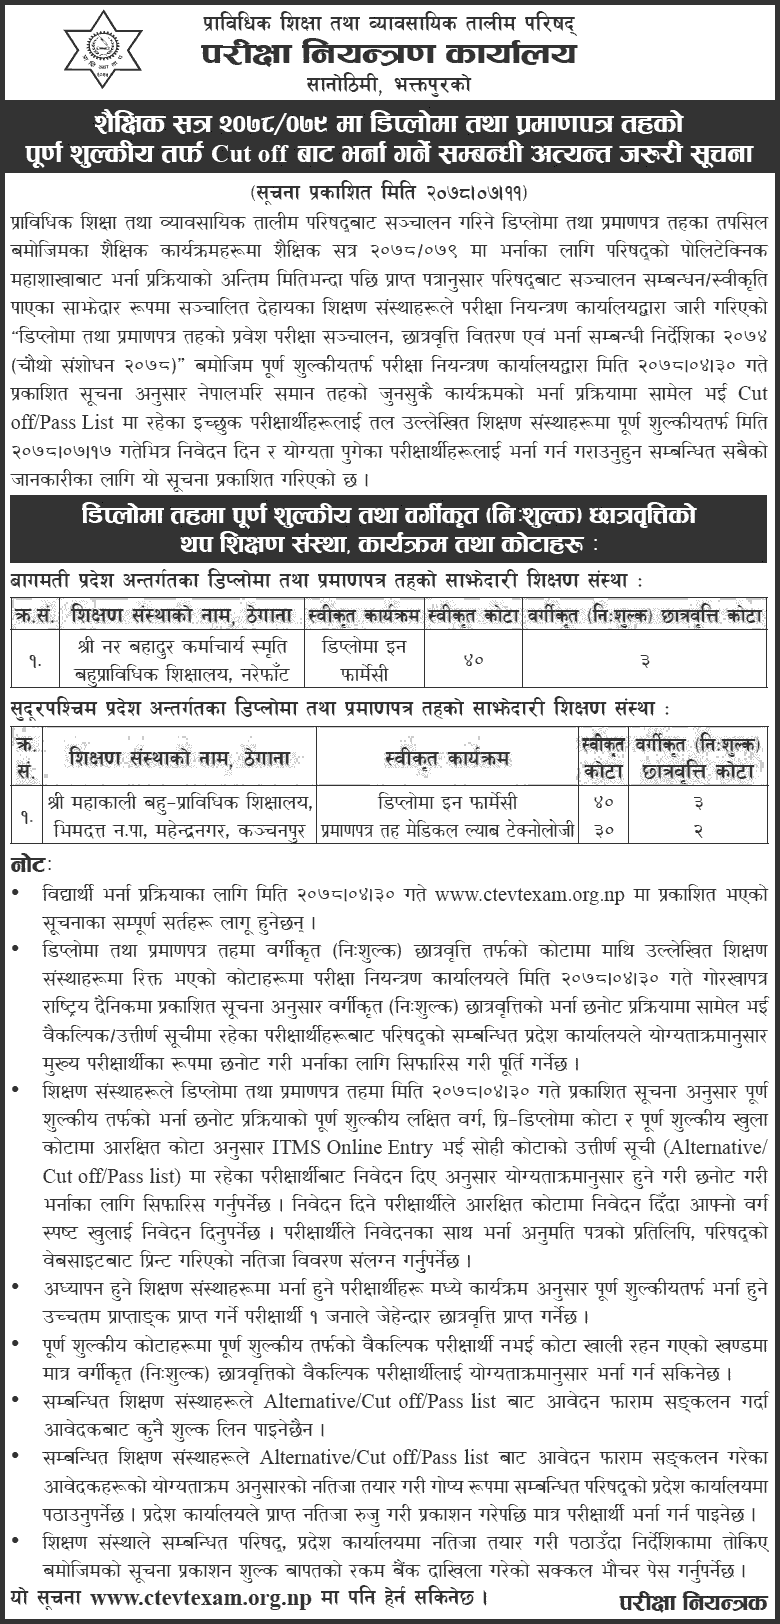 Diploma and PCL Level Admission Notice for Cut-Off and Pass List Students - CTEVT